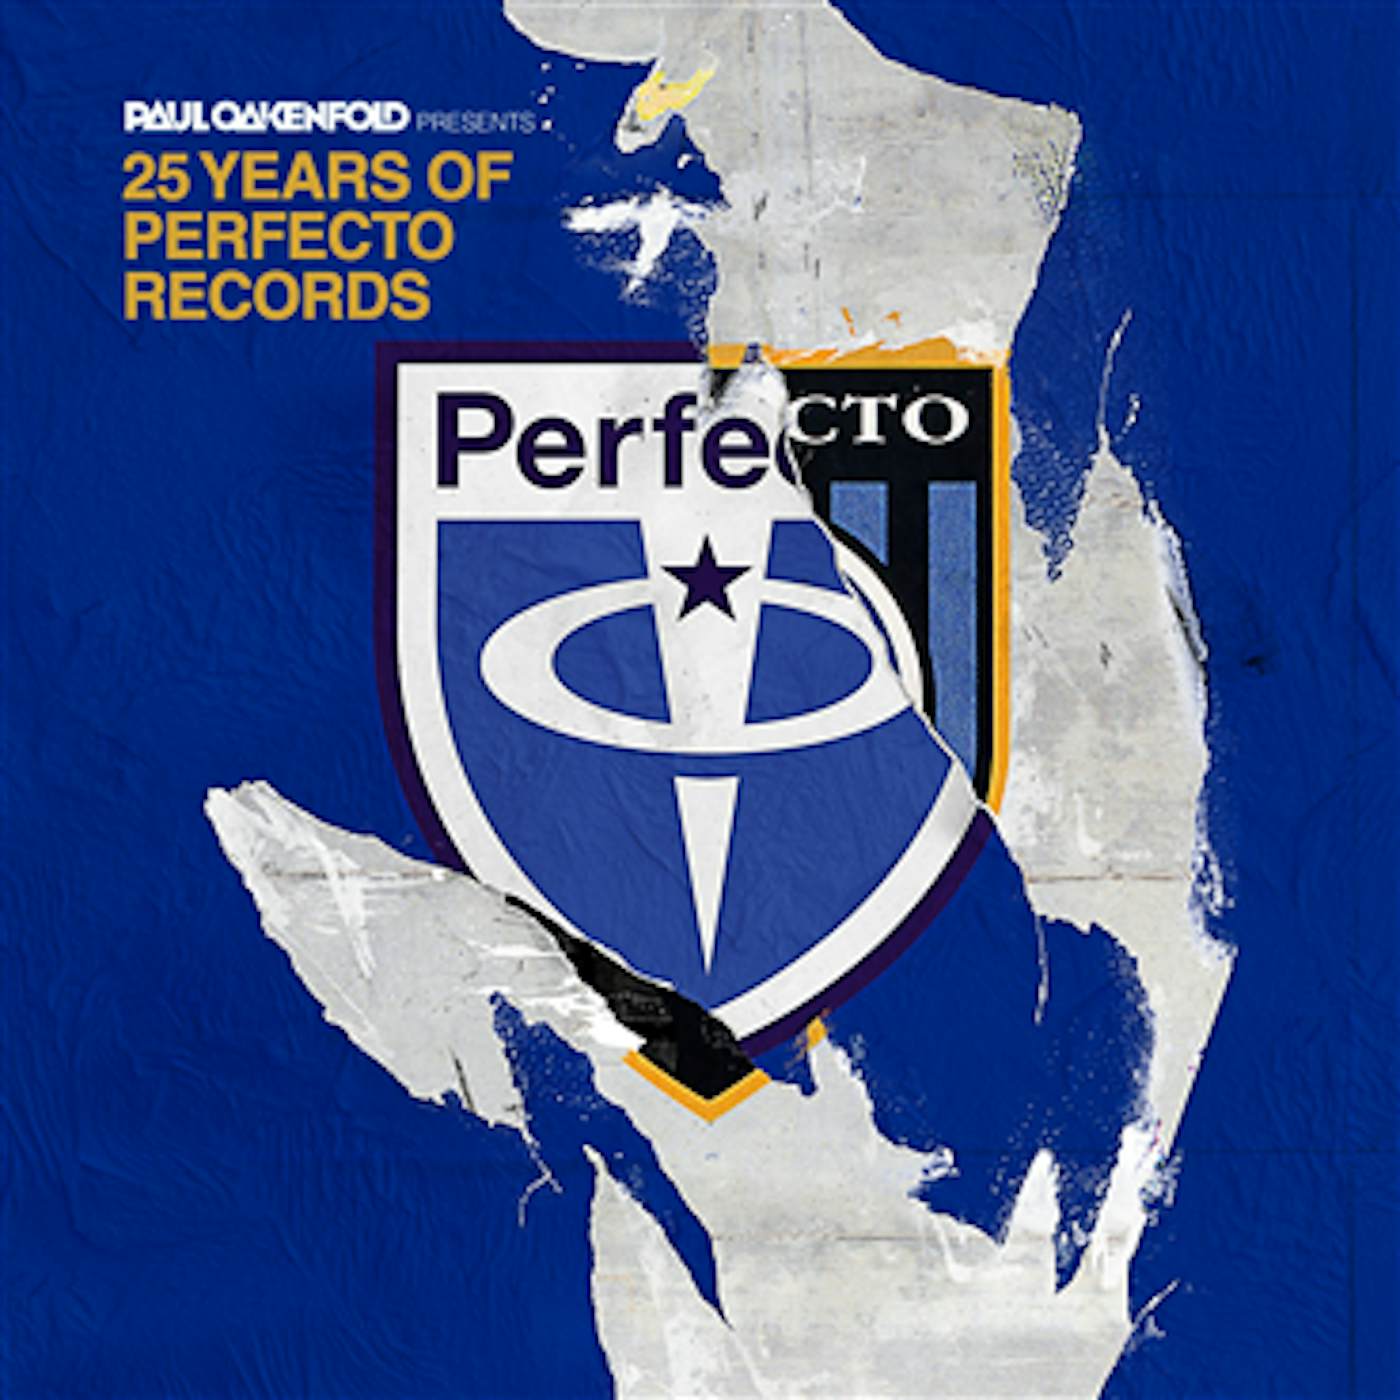 Paul Oakenfold 25 YEARS OF PERFECTO RECORDS CD